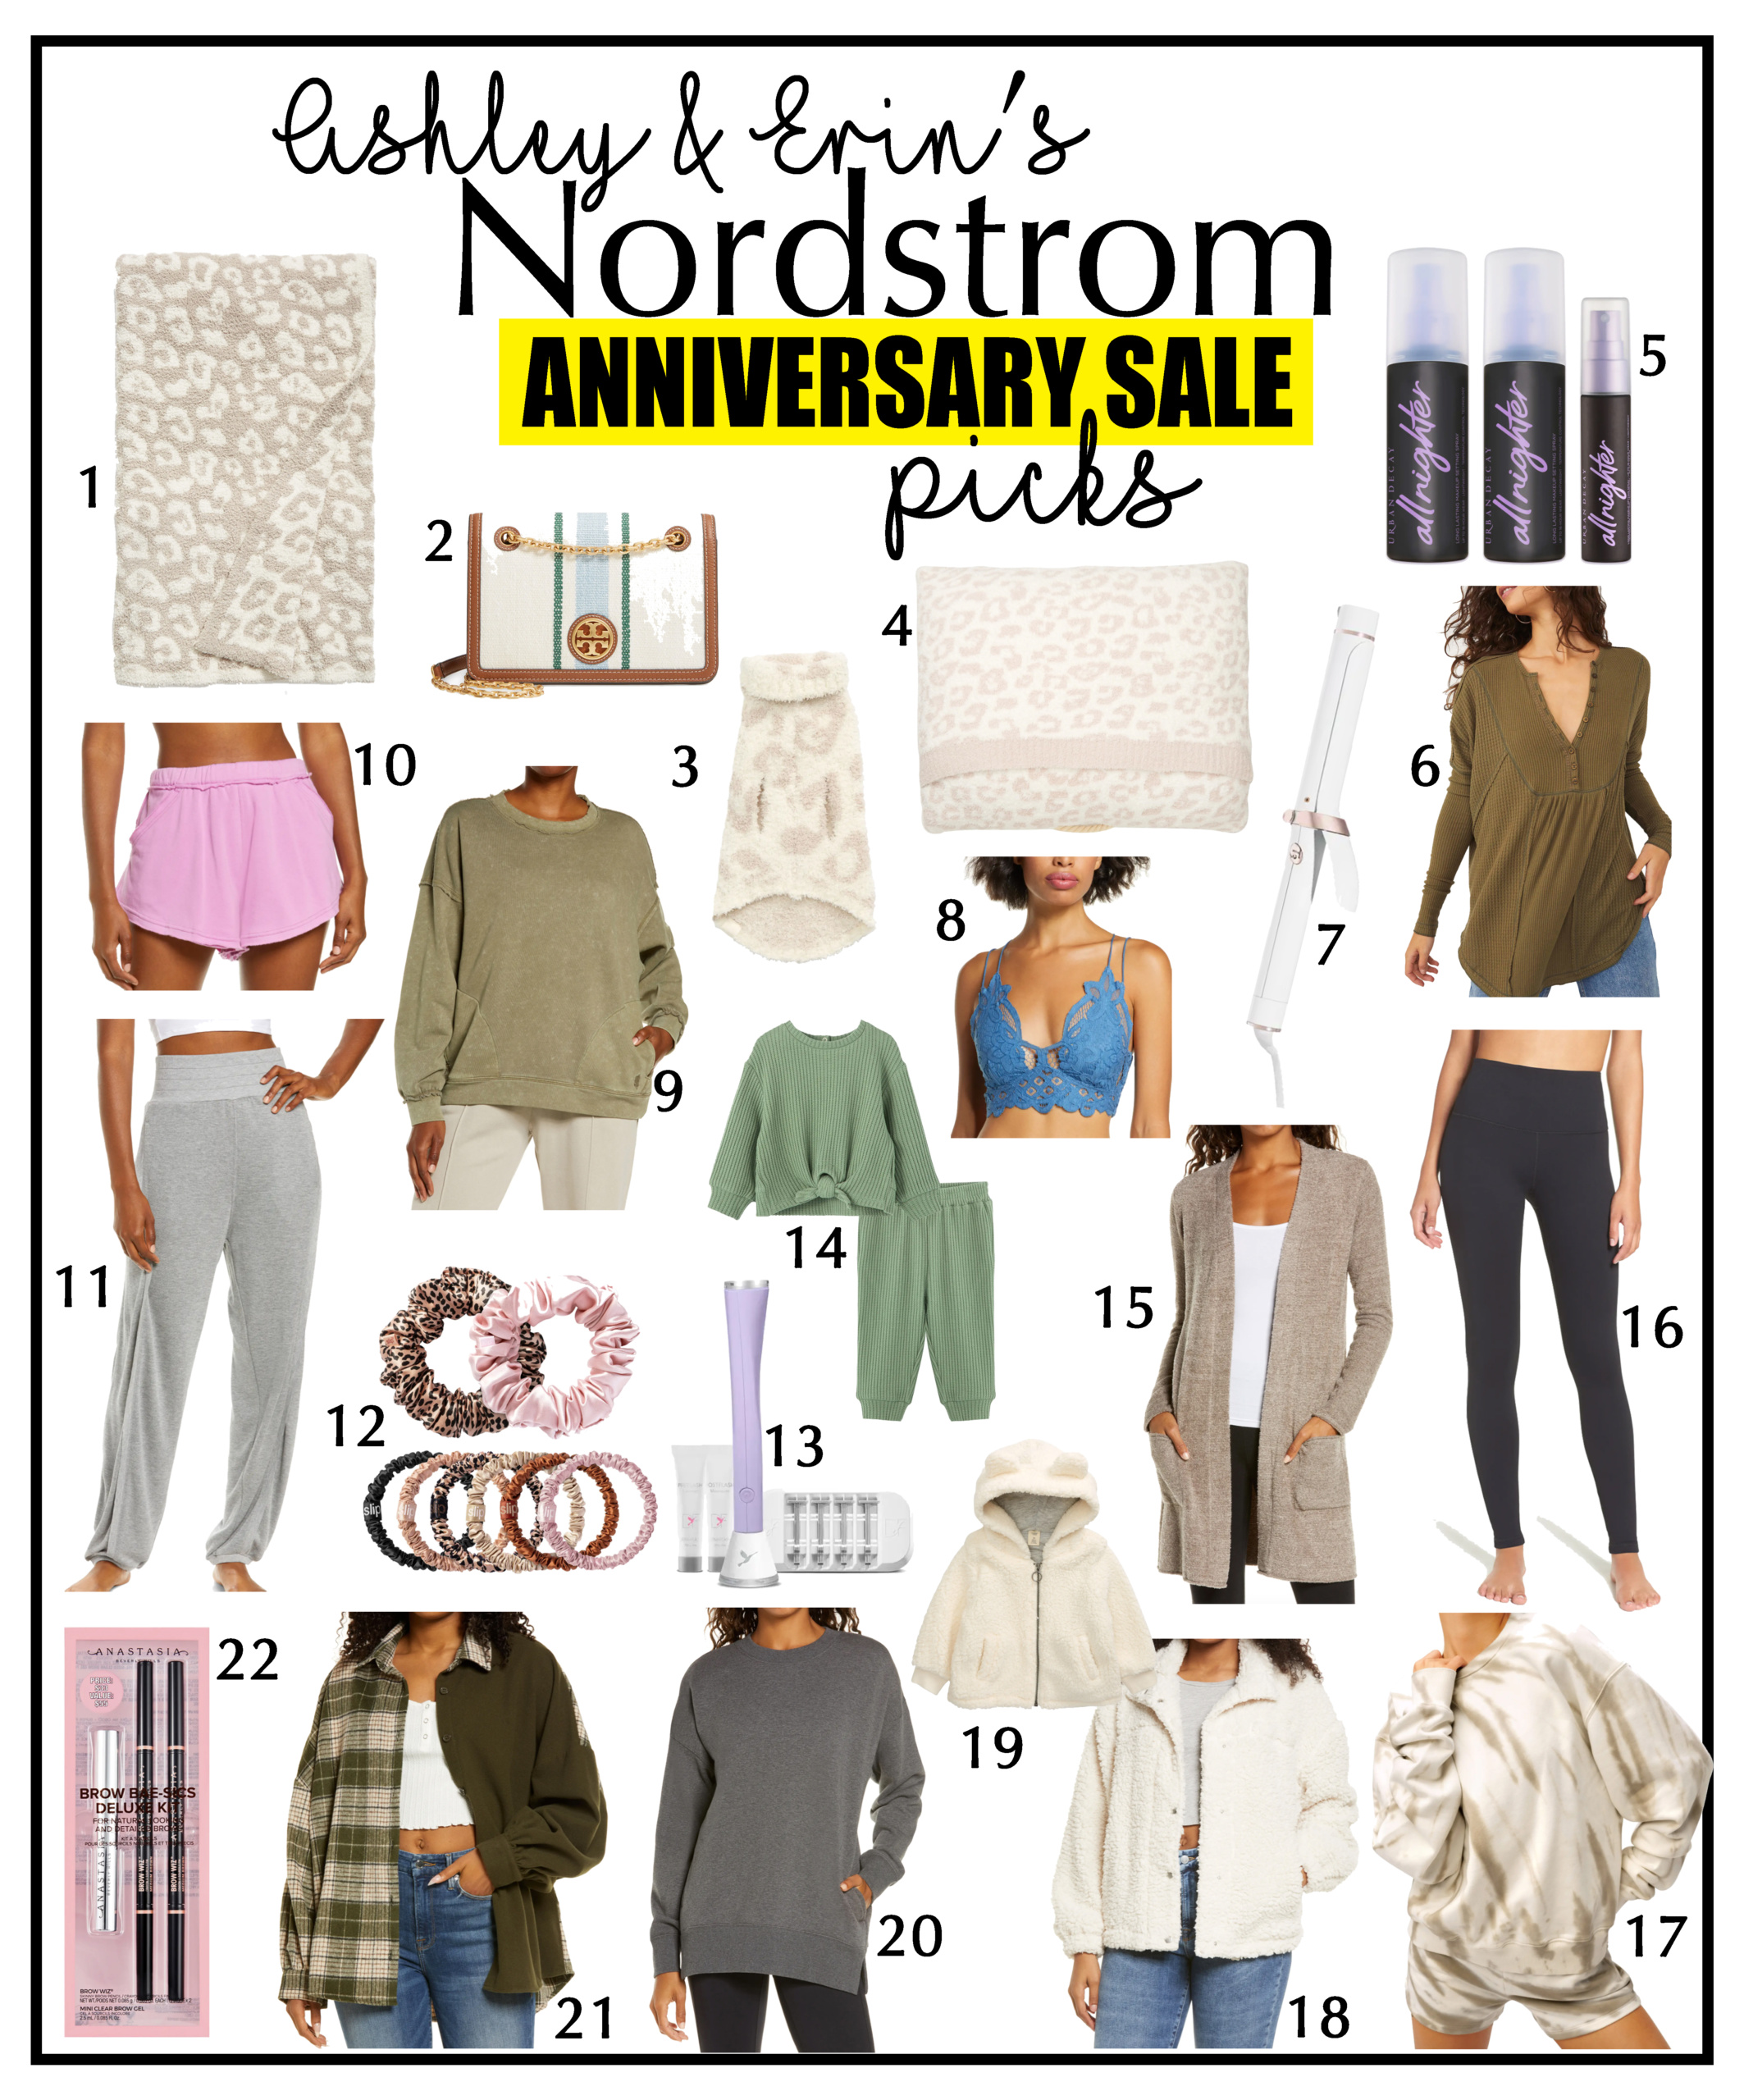 Nordstrom Anniversary sale: Barefoot Dreams blankets and more on sale